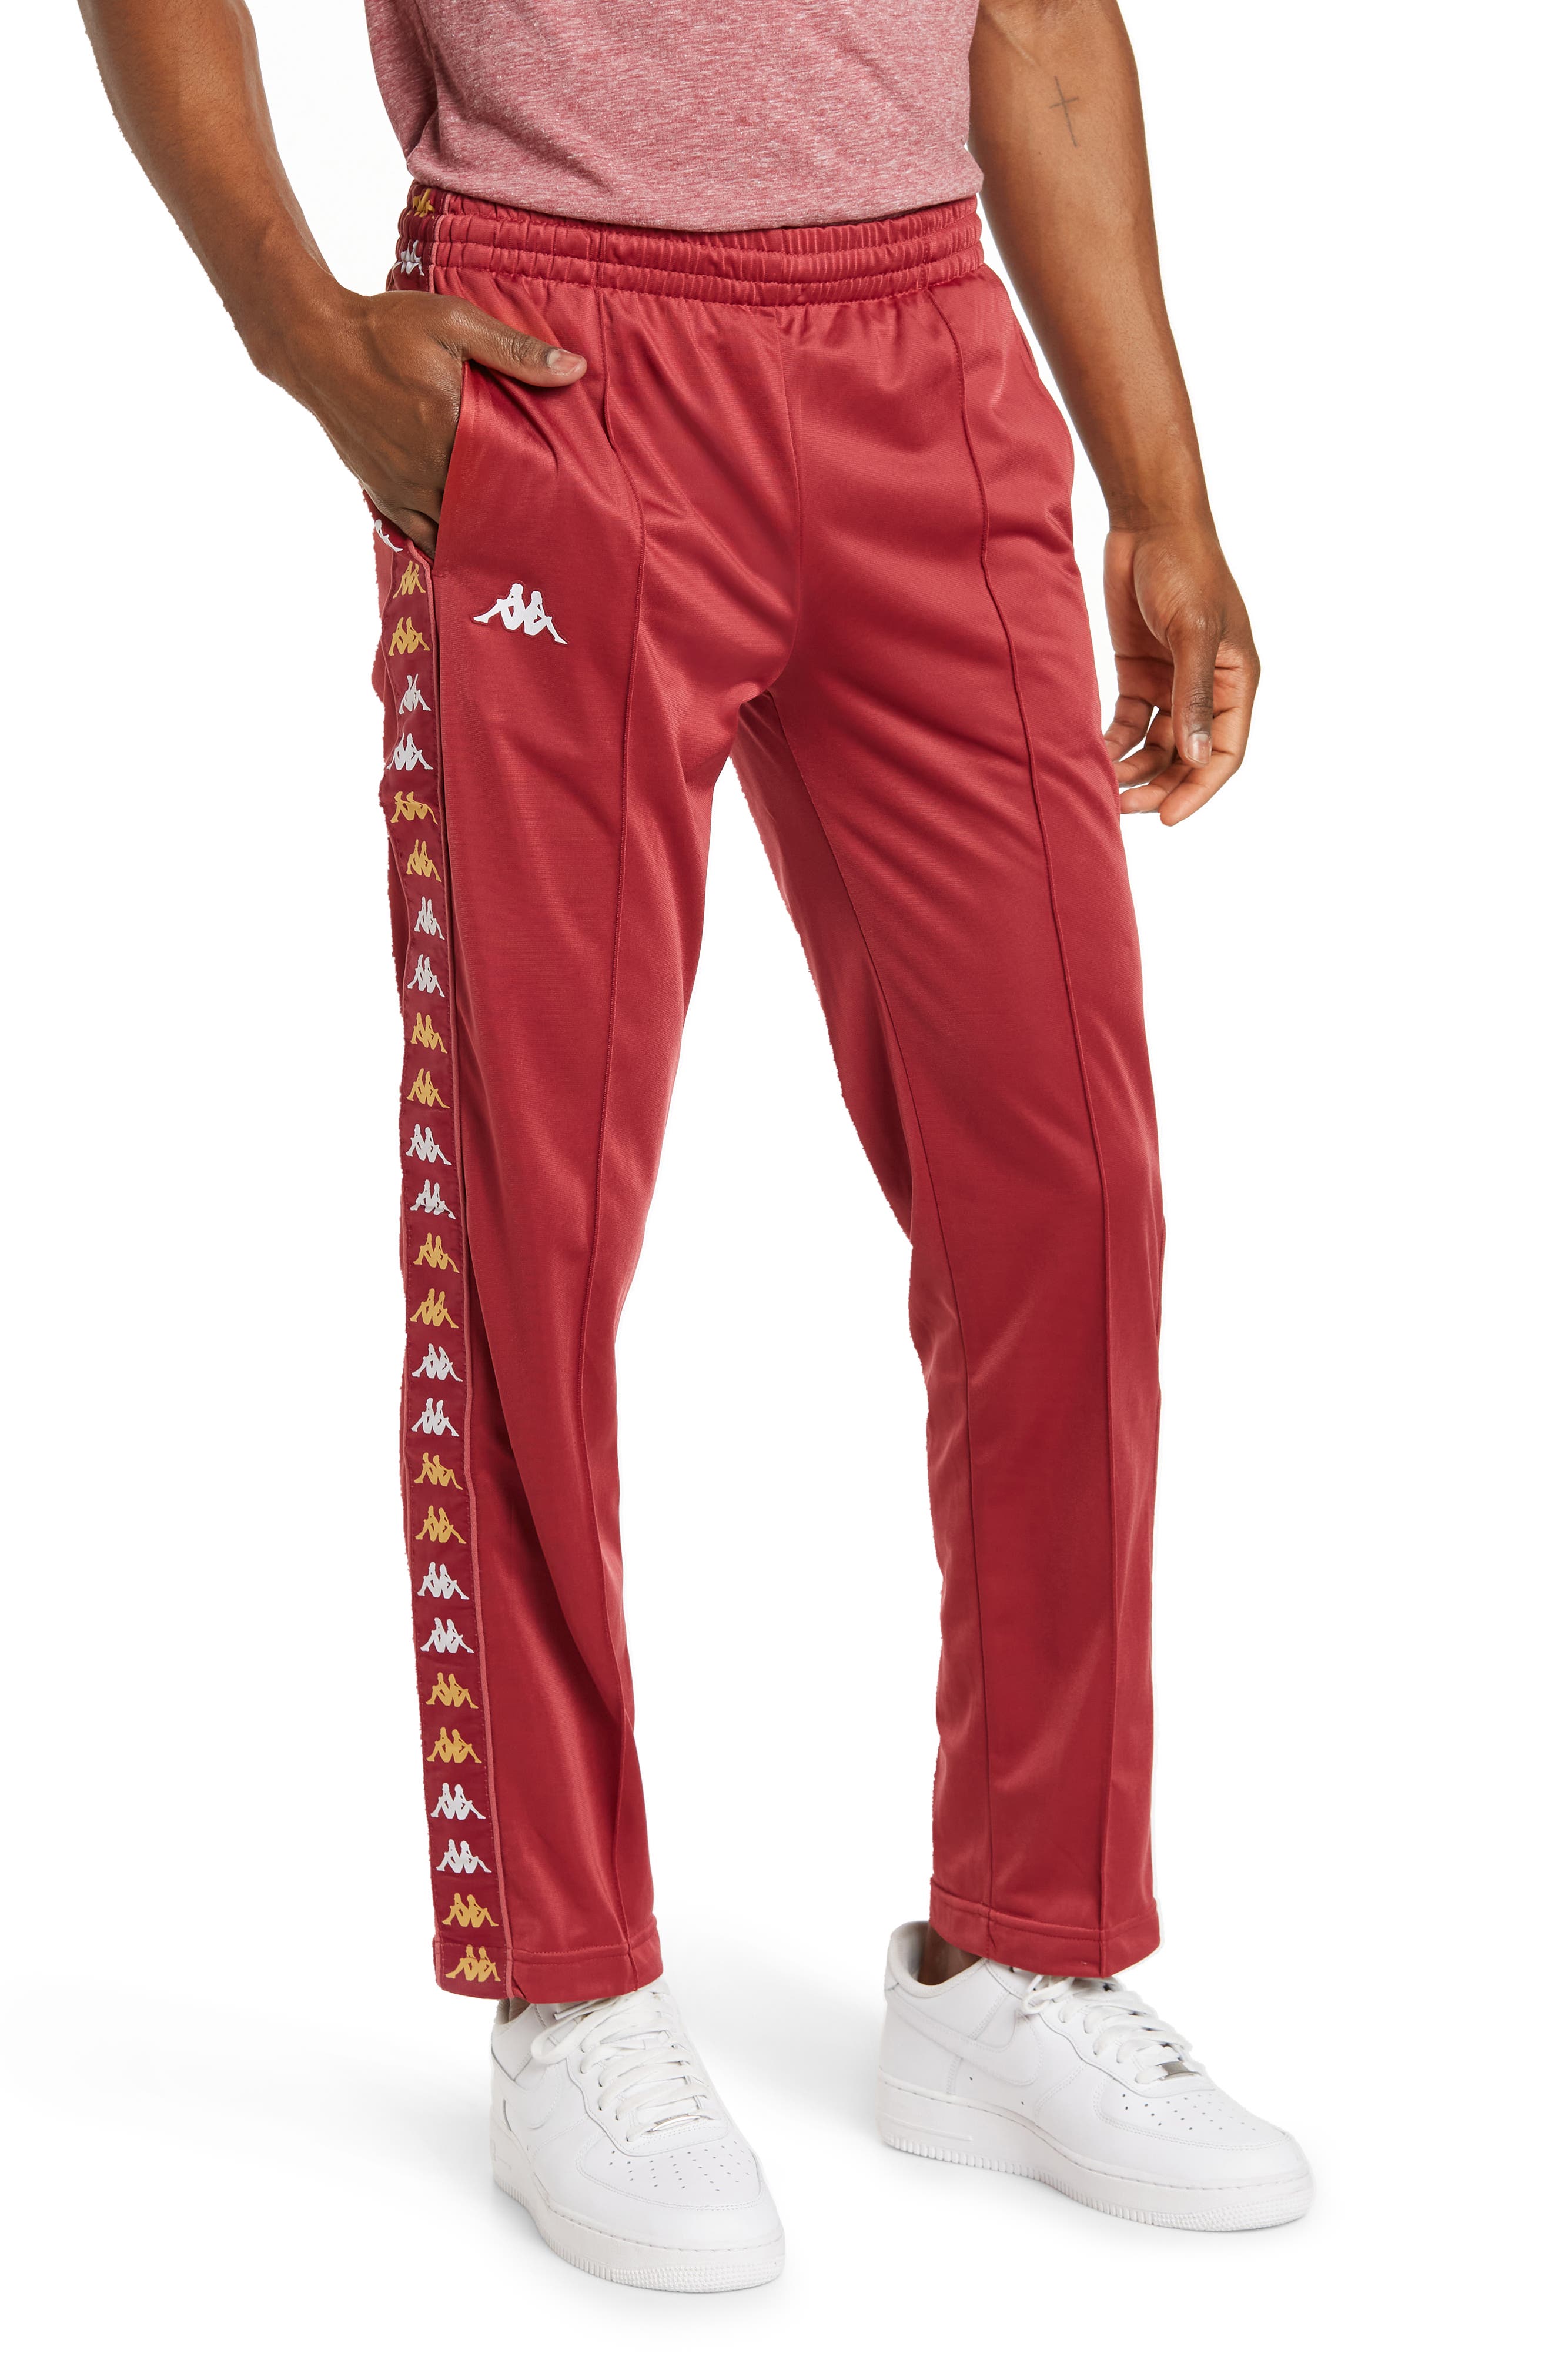 Kappa Men's 222 Banda Astoriazz Track Pants in Red Melody-Yellow-Bright White at Nordstrom, Size Small